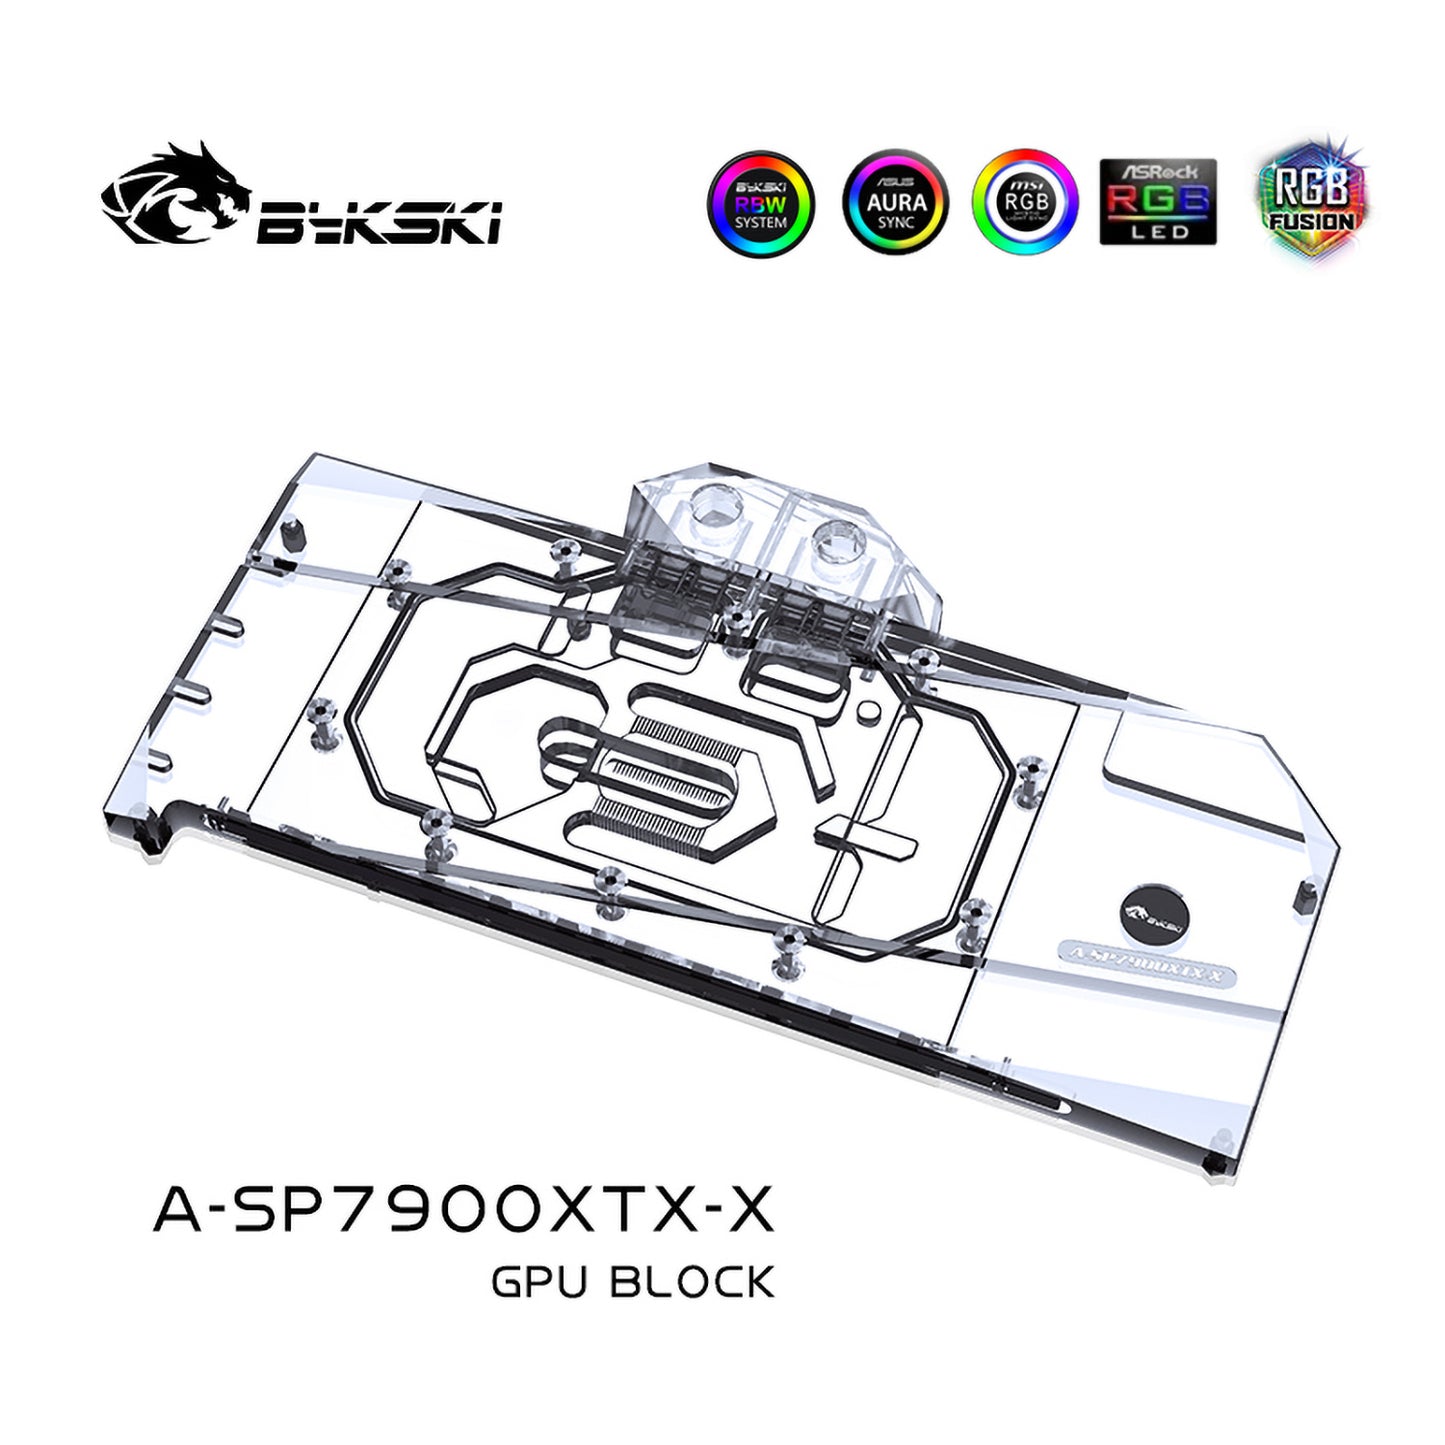 Bykski GPU Water Block For Sapphire RX 7900XTX/7900XT Nitro+ / Pulse, Full Cover With Backplate PC Water Cooling Cooler, A-SP7900XTX-X